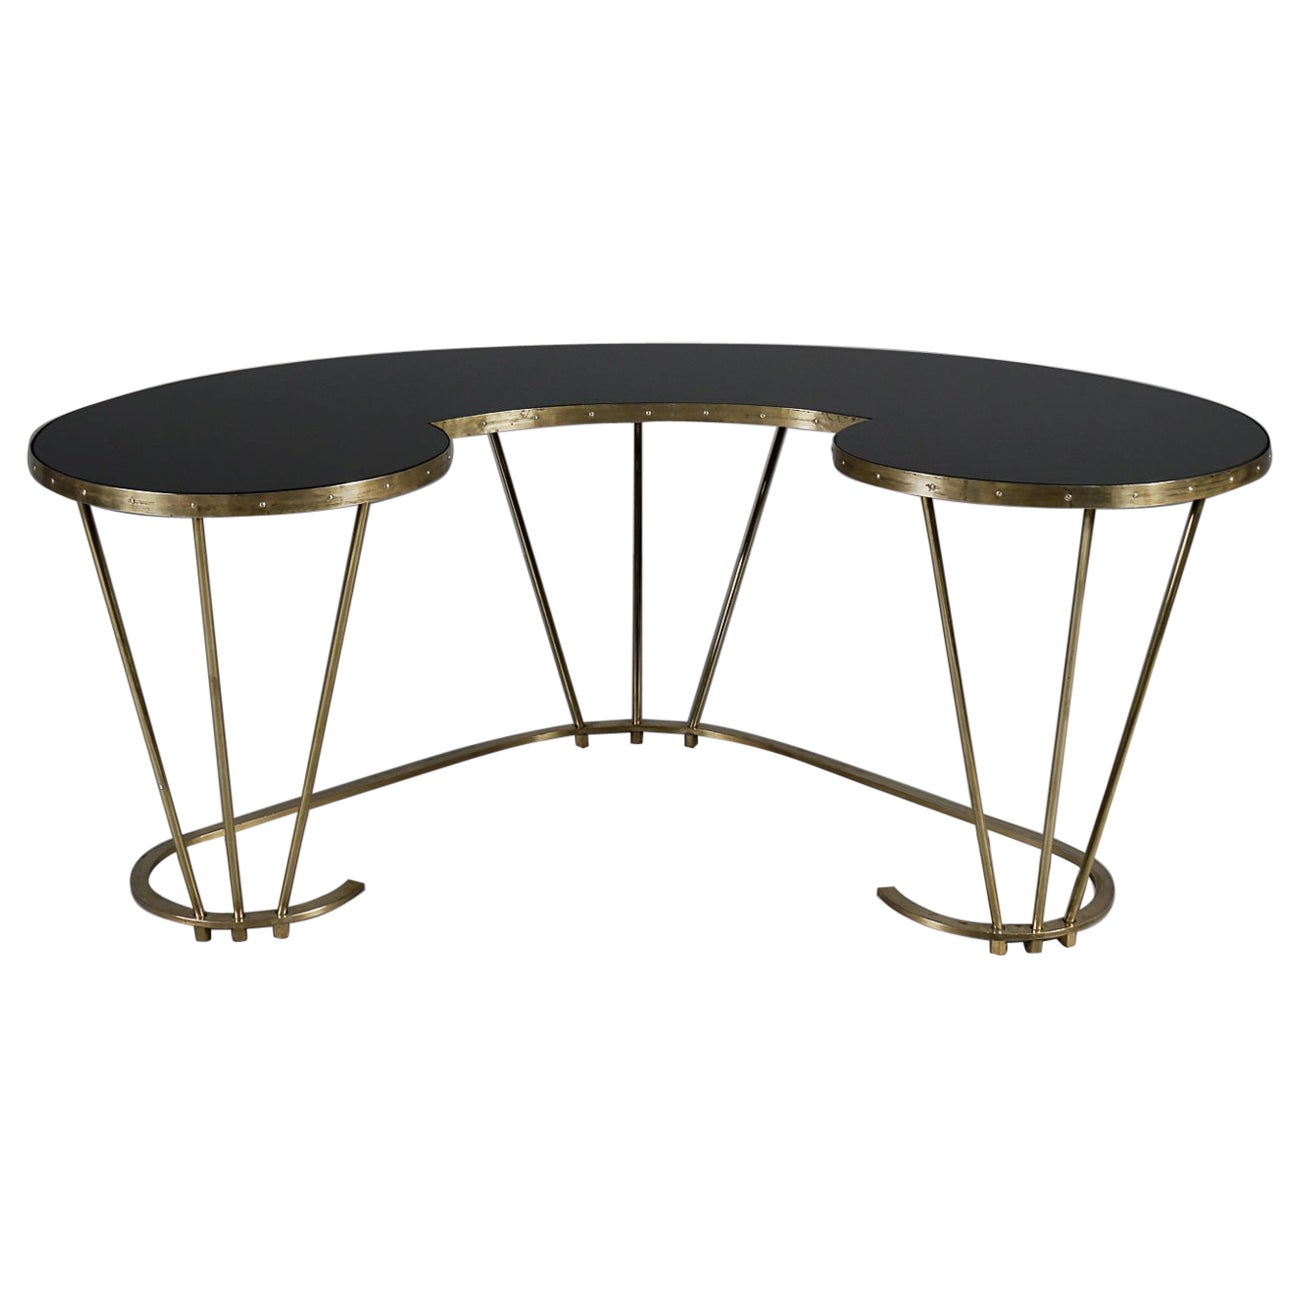 Unique Desk or Dressing Table Made of Solid Brass and Black Glass, 1950s, Italy For Sale